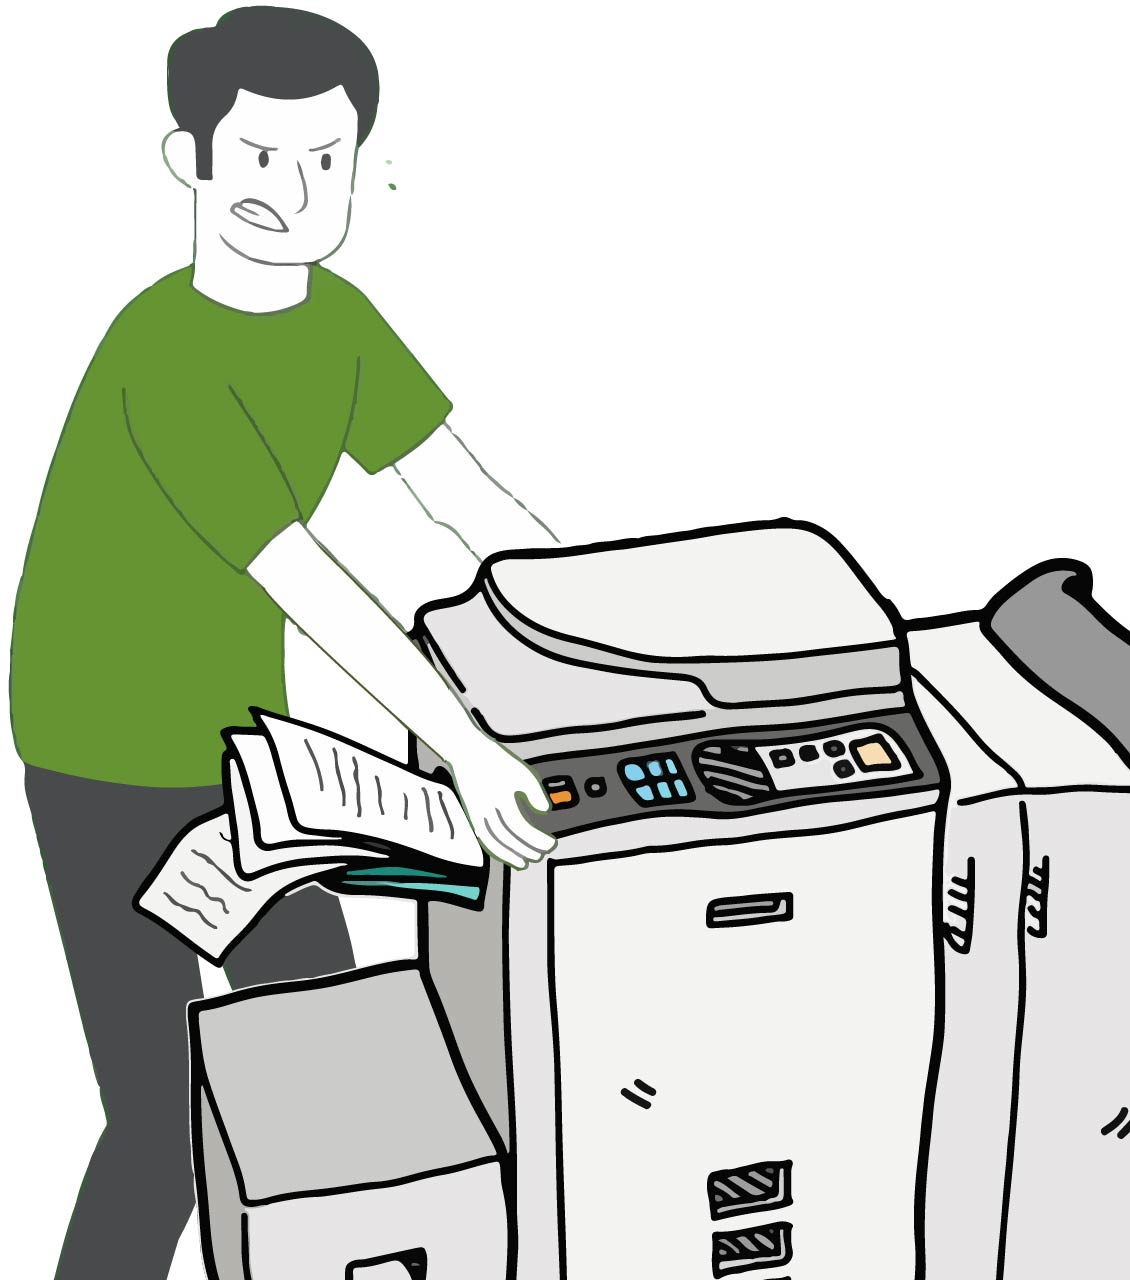 Copy Machine Removal & Disposal Services